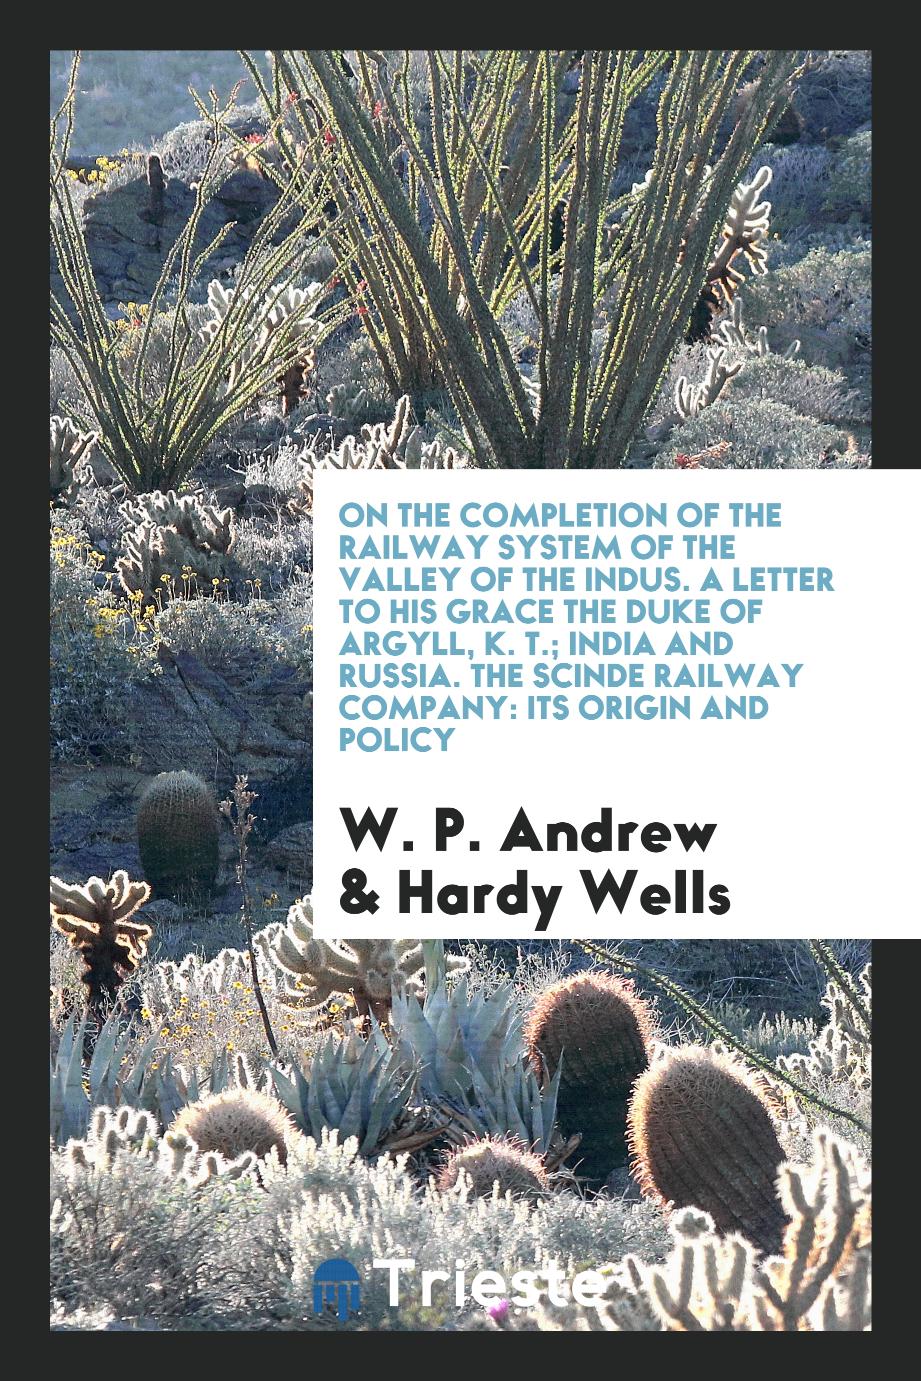 On the Completion of the Railway System of the Valley of the Indus. A Letter to His Grace the Duke of Argyll, K. T.; India and Russia. The Scinde Railway Company: Its Origin and Policy